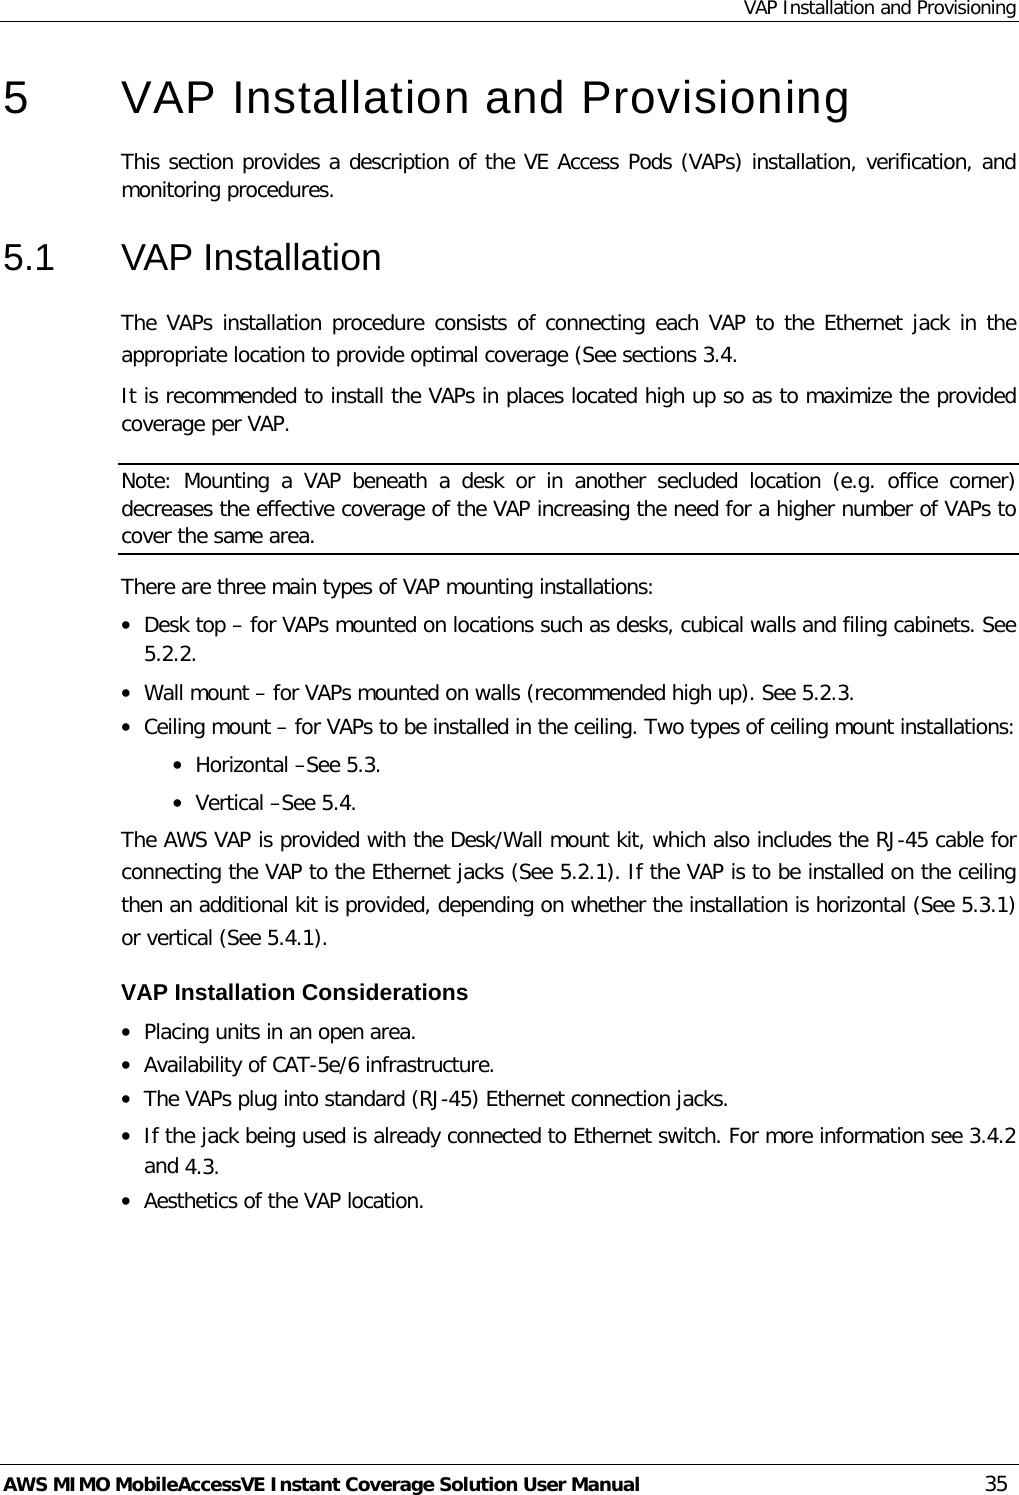 VAP Installation and Provisioning AWS MIMO MobileAccessVE Instant Coverage Solution User Manual  35 5  VAP Installation and Provisioning This section provides a description of the VE Access Pods (VAPs) installation, verification, and monitoring procedures. 5.1  VAP Installation The VAPs installation procedure consists of connecting each VAP to the Ethernet jack in the appropriate location to provide optimal coverage (See sections  3.4. It is recommended to install the VAPs in places located high up so as to maximize the provided coverage per VAP. Note:  Mounting a  VAP  beneath  a desk or in another secluded location (e.g. office corner) decreases the effective coverage of the VAP increasing the need for a higher number of VAPs to cover the same area. There are three main types of VAP mounting installations: • Desk top – for VAPs mounted on locations such as desks, cubical walls and filing cabinets. See  5.2.2. • Wall mount – for VAPs mounted on walls (recommended high up). See  5.2.3. • Ceiling mount – for VAPs to be installed in the ceiling. Two types of ceiling mount installations: • Horizontal –See  5.3. • Vertical –See  5.4. The AWS VAP is provided with the Desk/Wall mount kit, which also includes the RJ-45 cable for connecting the VAP to the Ethernet jacks (See  5.2.1). If the VAP is to be installed on the ceiling then an additional kit is provided, depending on whether the installation is horizontal (See  5.3.1) or vertical (See  5.4.1). VAP Installation Considerations • Placing units in an open area. • Availability of CAT-5e/6 infrastructure. • The VAPs plug into standard (RJ-45) Ethernet connection jacks. • If the jack being used is already connected to Ethernet switch. For more information see  3.4.2 and  4.3. • Aesthetics of the VAP location. 